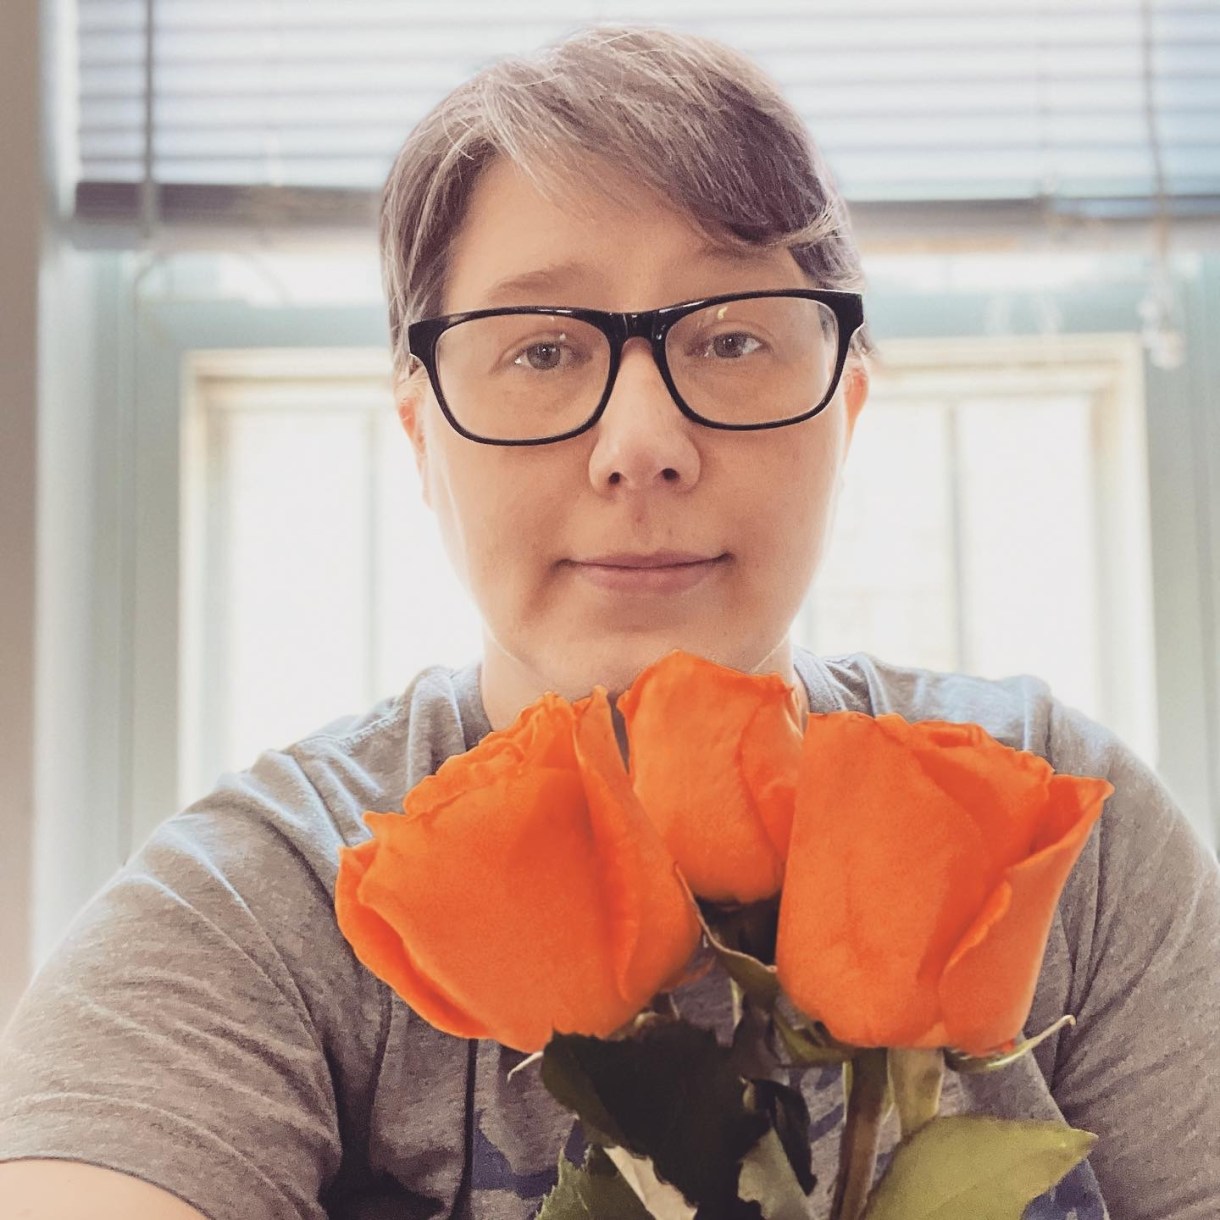 Heather is a white woman with short gray hair and black frame glasses. Here she is holding up three orange roses and raising an eyebrow.